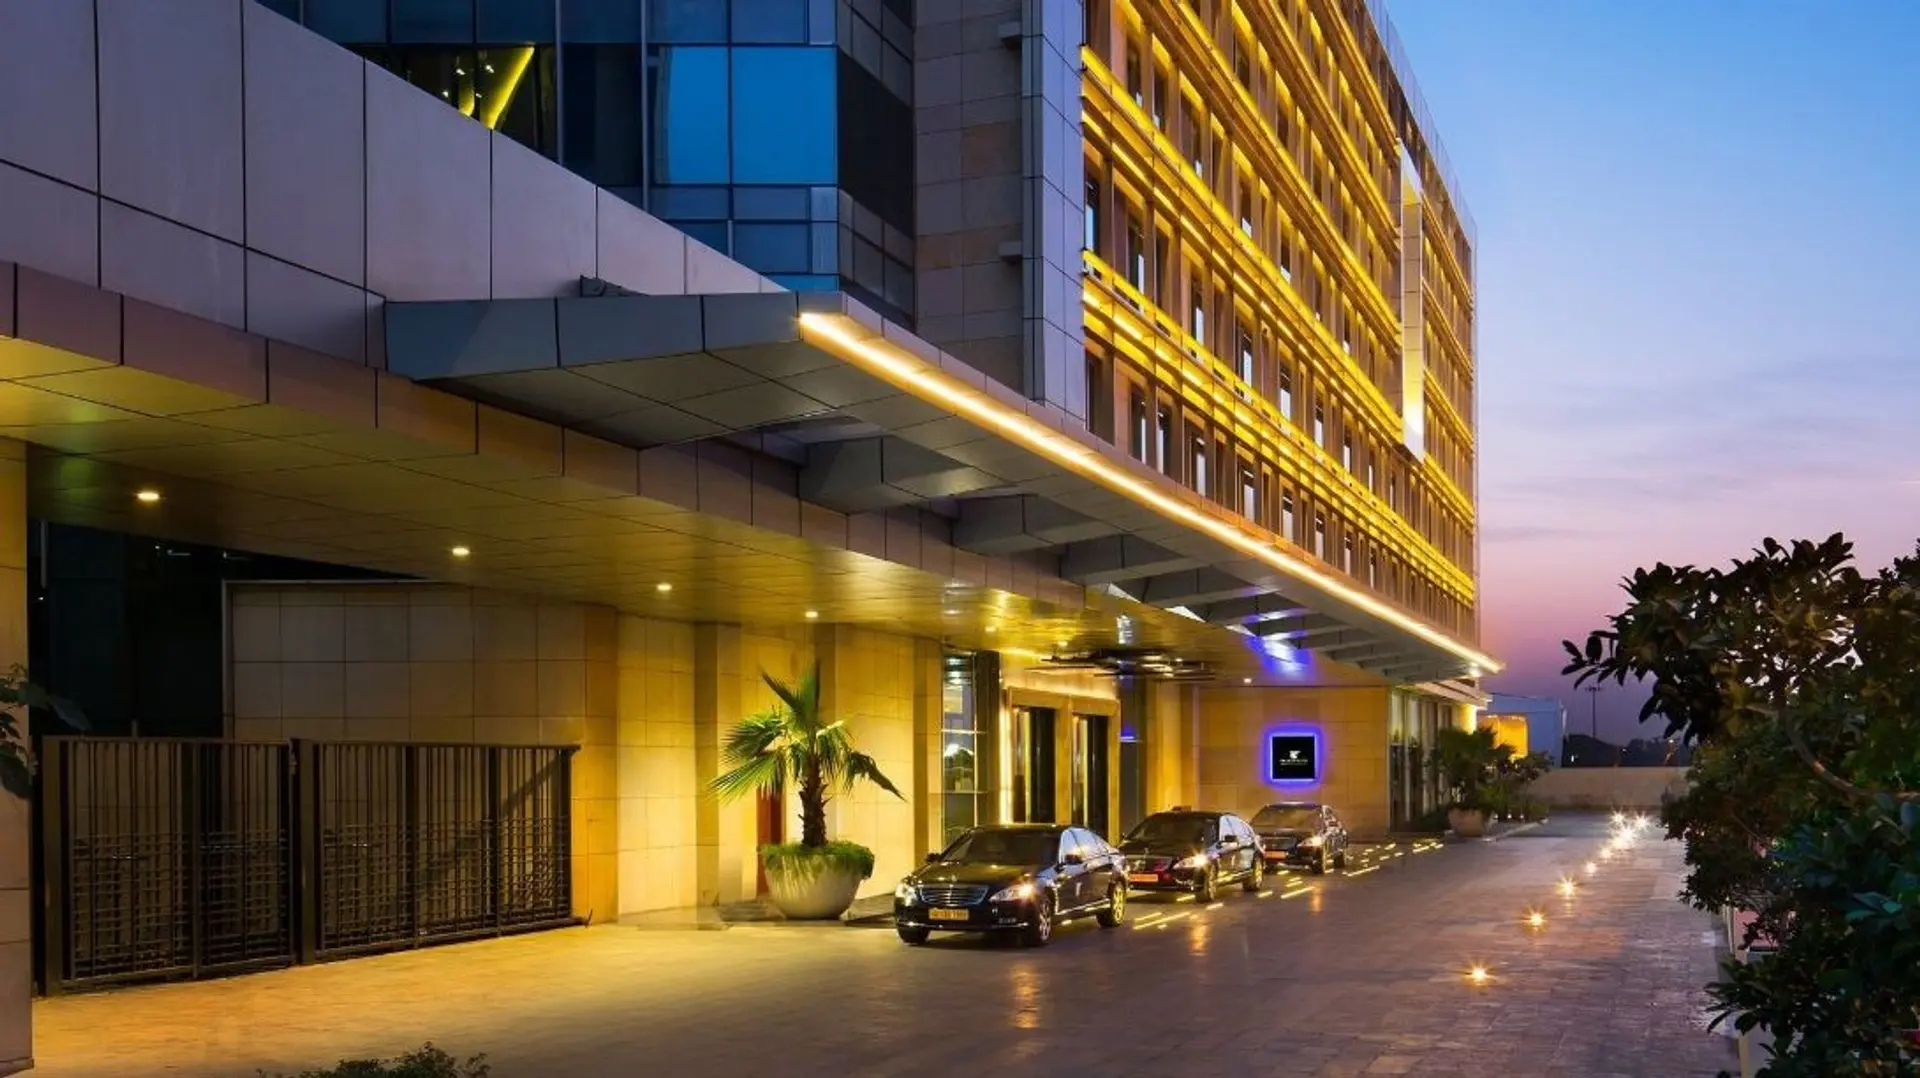 Outside view of the JW Mariott Hotel at New Delhi